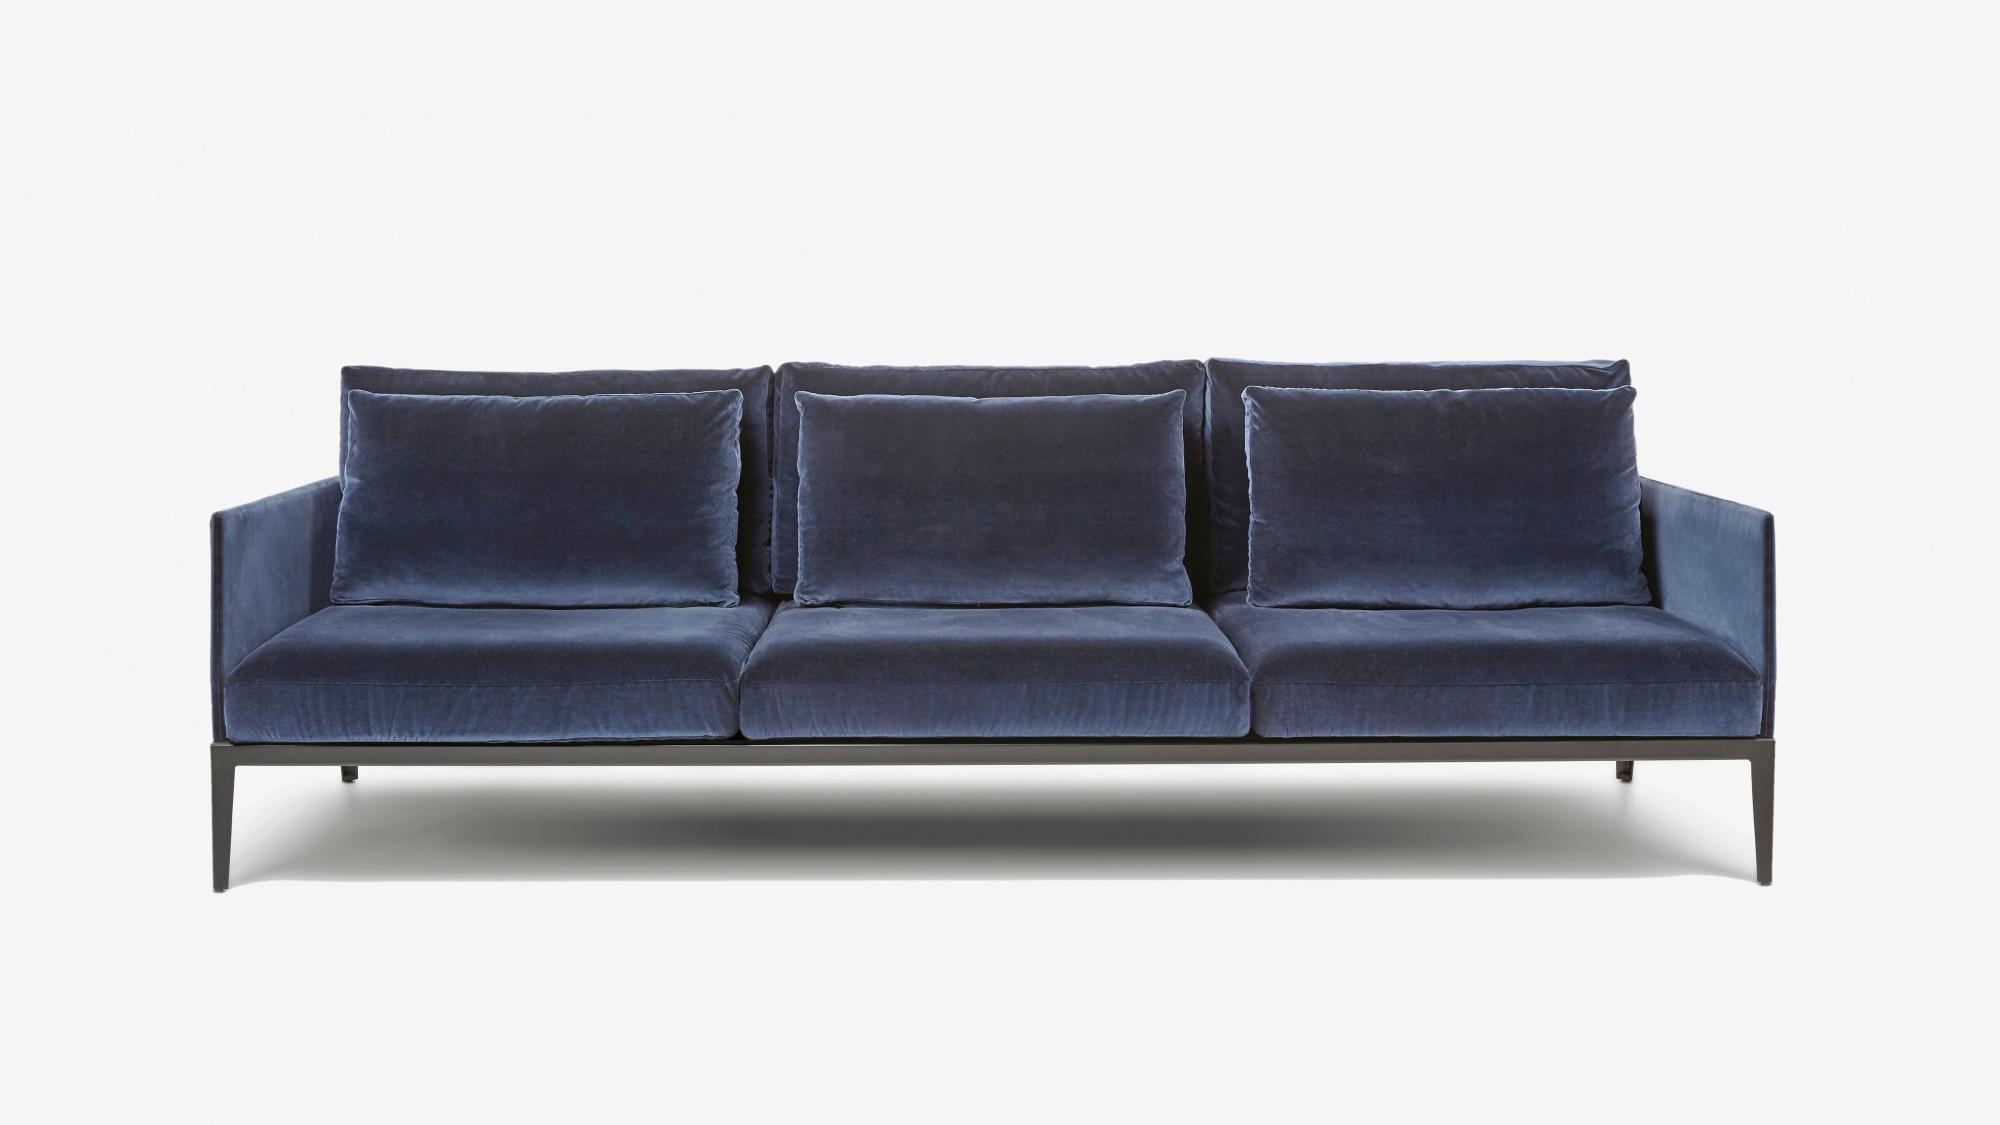 Liaison Sofa from District